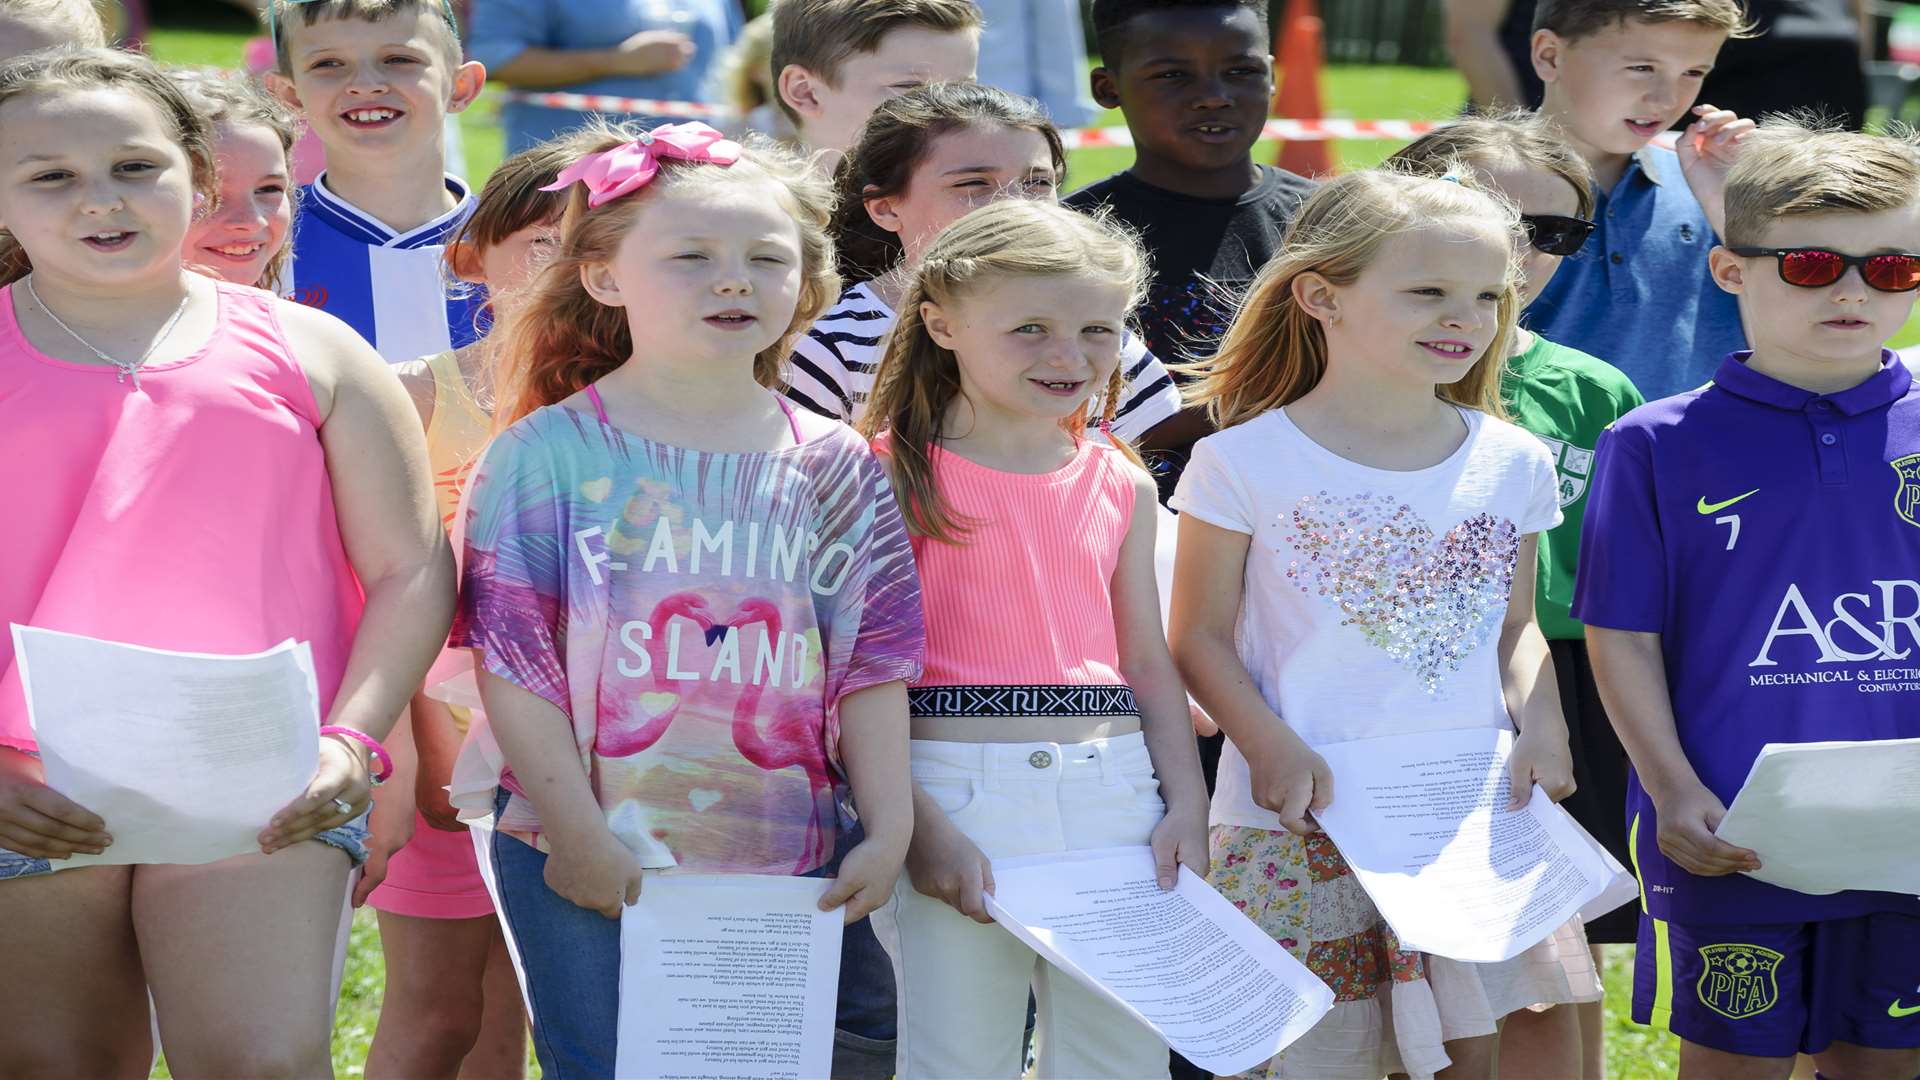 The school choir offered a sing-song at the celebration.